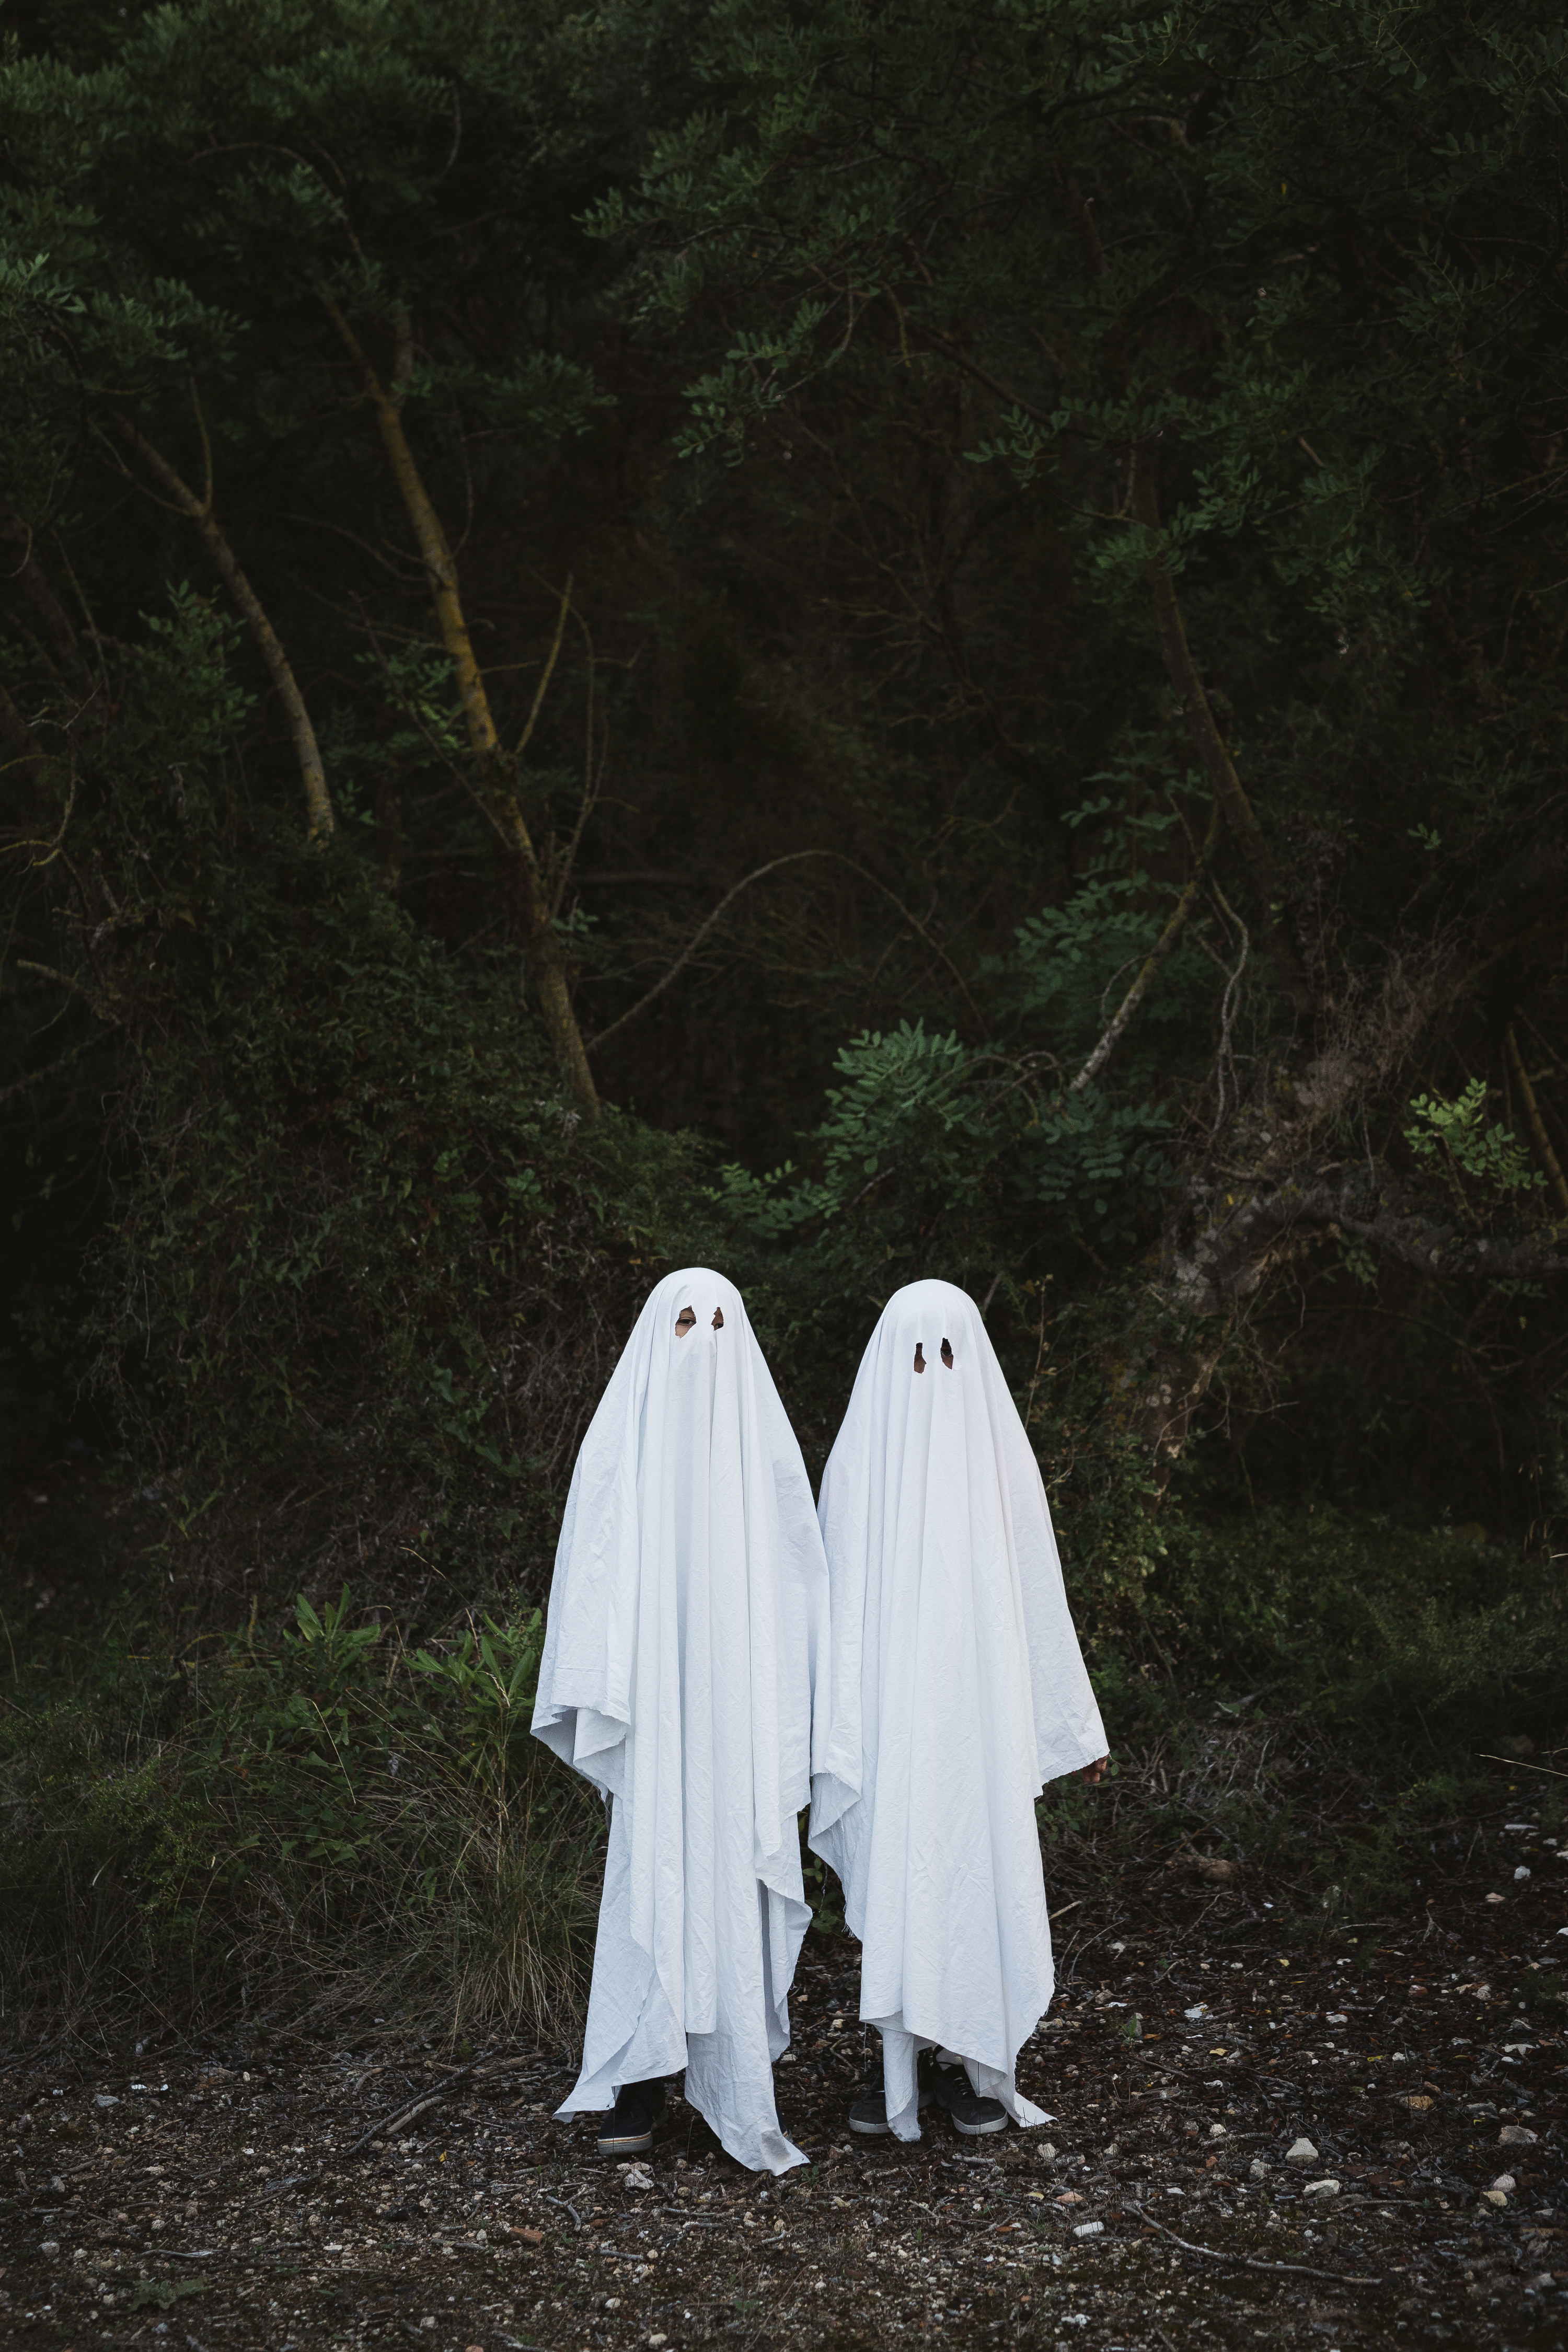 Children dressed up as ghost draped with white sheet in a forest